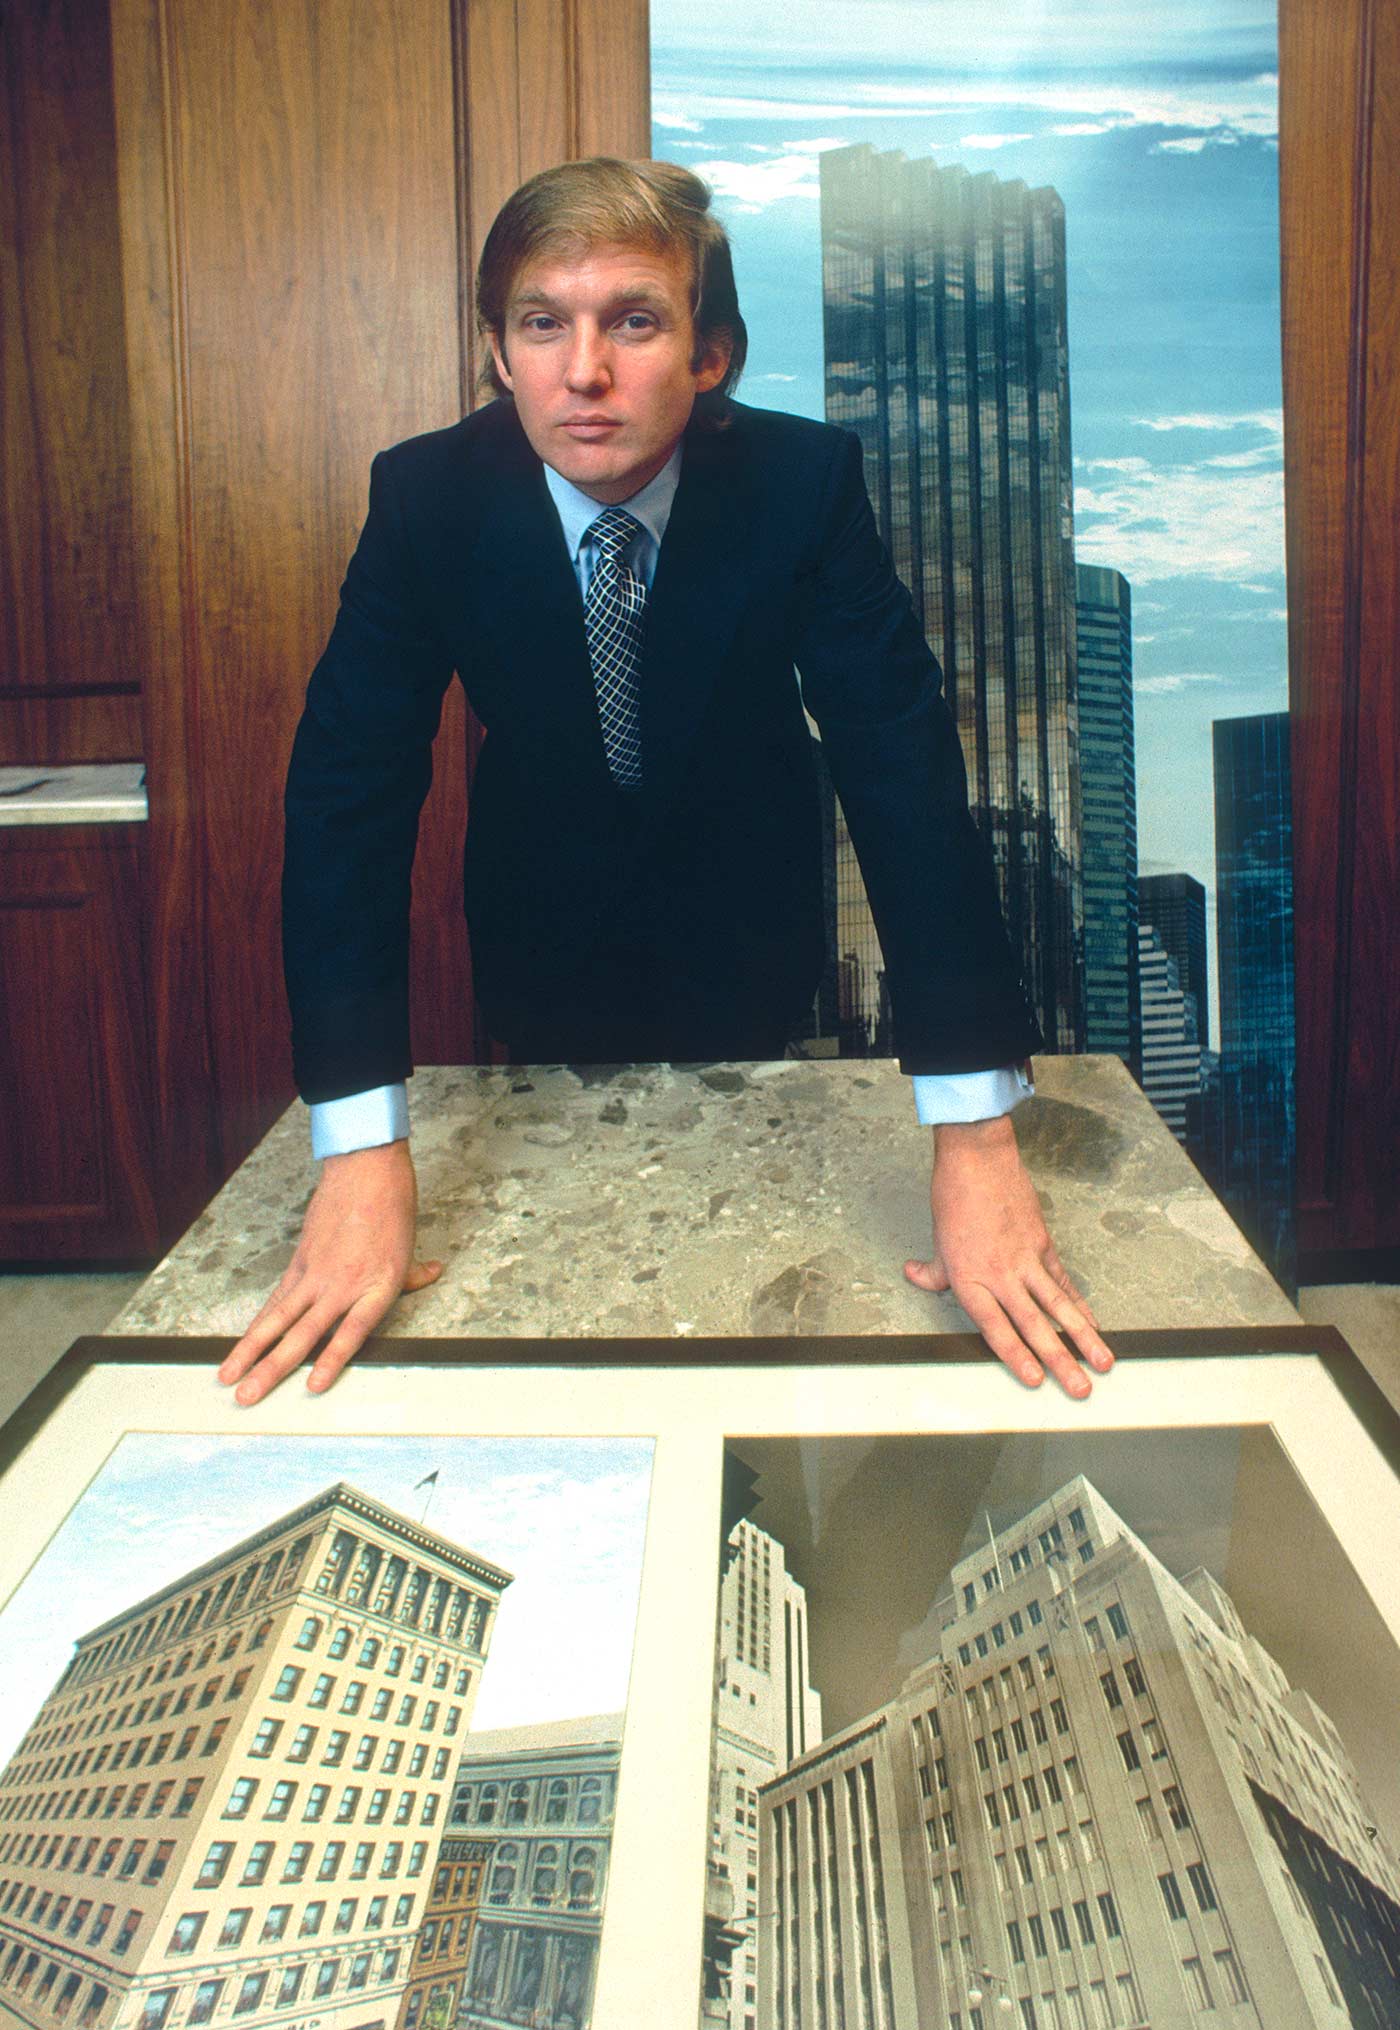 Donald Trump with a rendering of Trump Tower and photographs of the Bonwit Teller Building in New York in 1980